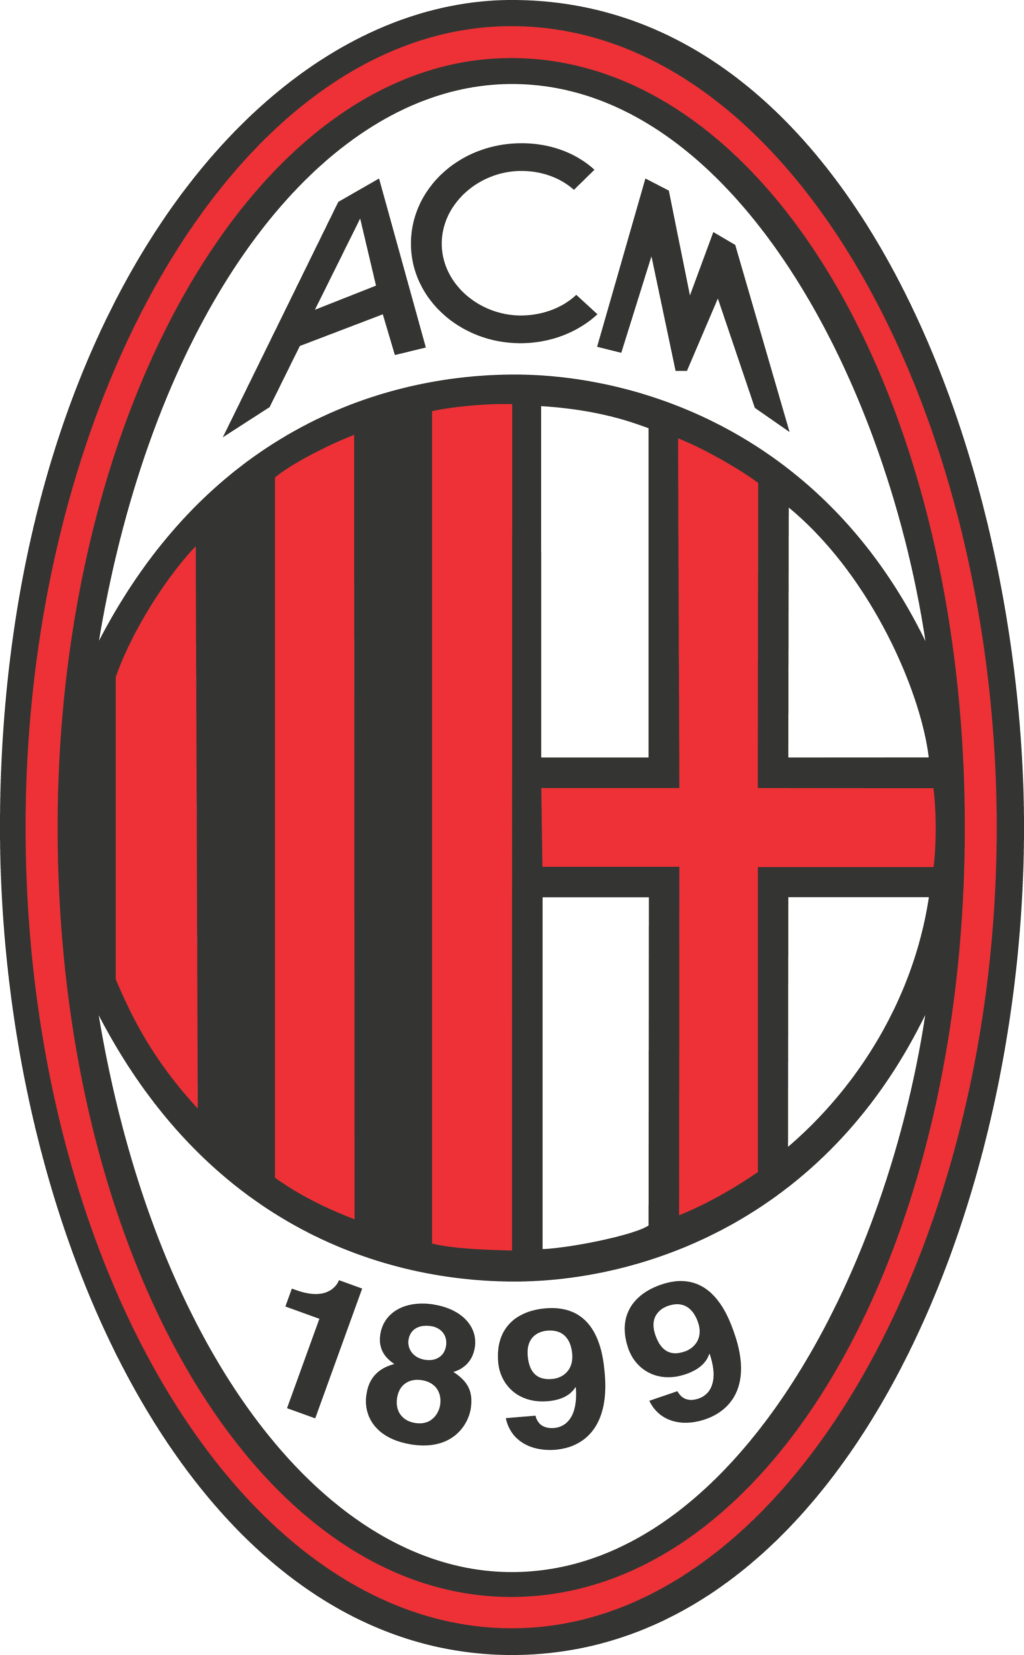 milan ac 01 European Football (Italian Serie A) AC Milan SVG, SVG Files For Silhouette, AC Milan Files For Cricut, AC Milan SVG, DXF, EPS, PNG Instant Download. AC Milan SVG, SVG Files For Silhouette, AC Milan Files For Cricut, AC Milan SVG, DXF, EPS, PNG Instant Download.